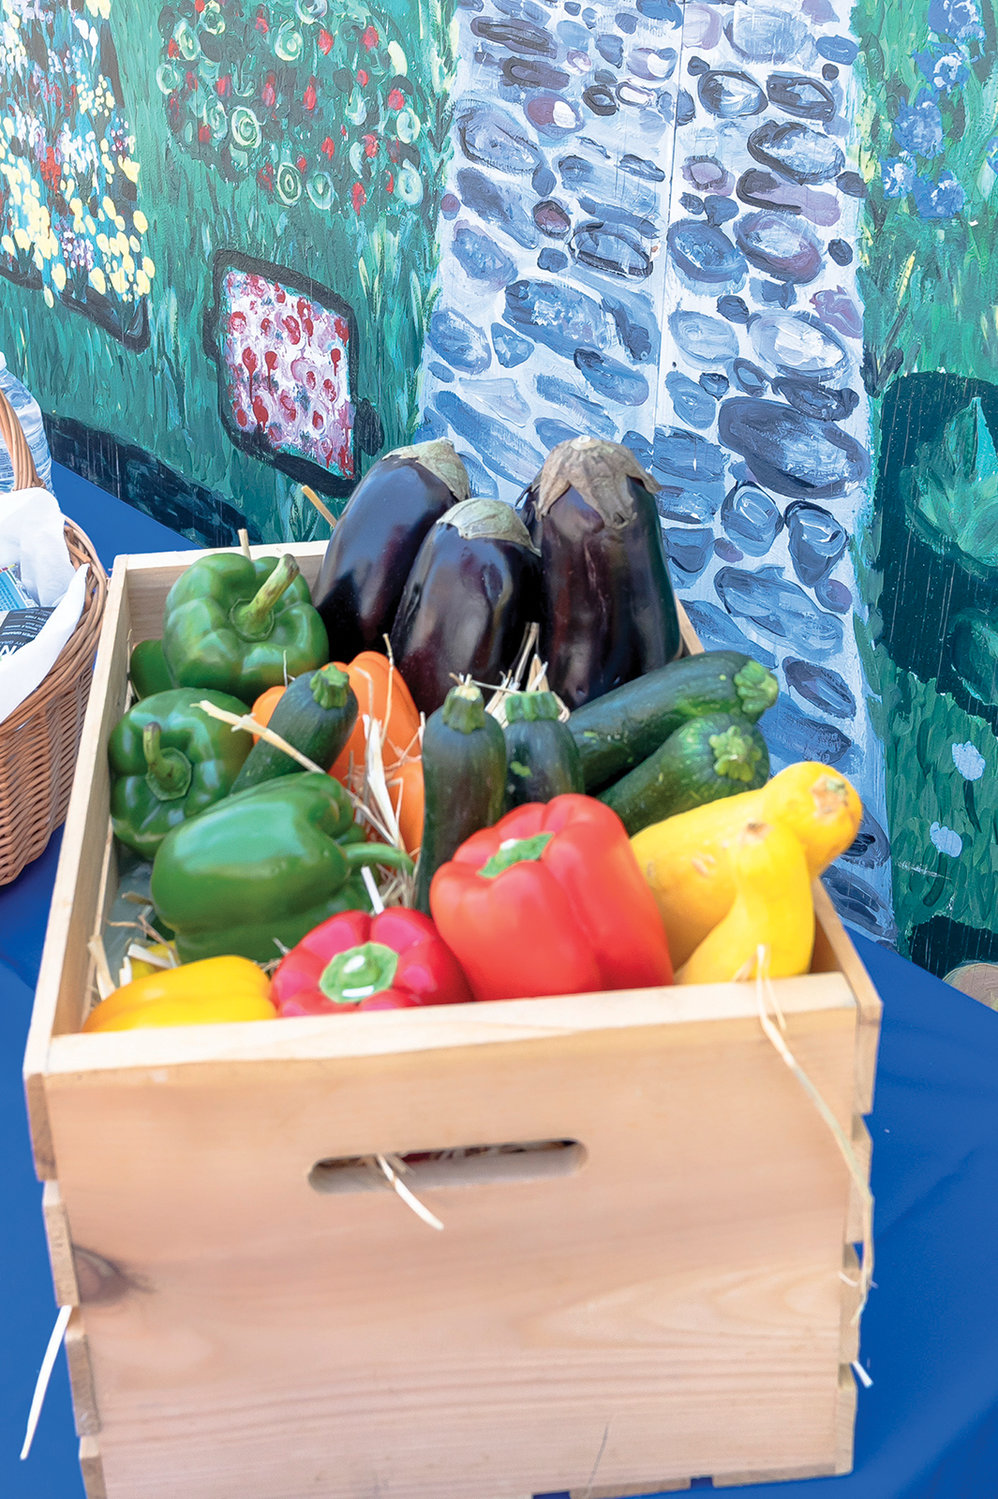 A box of vegetables is displayed.